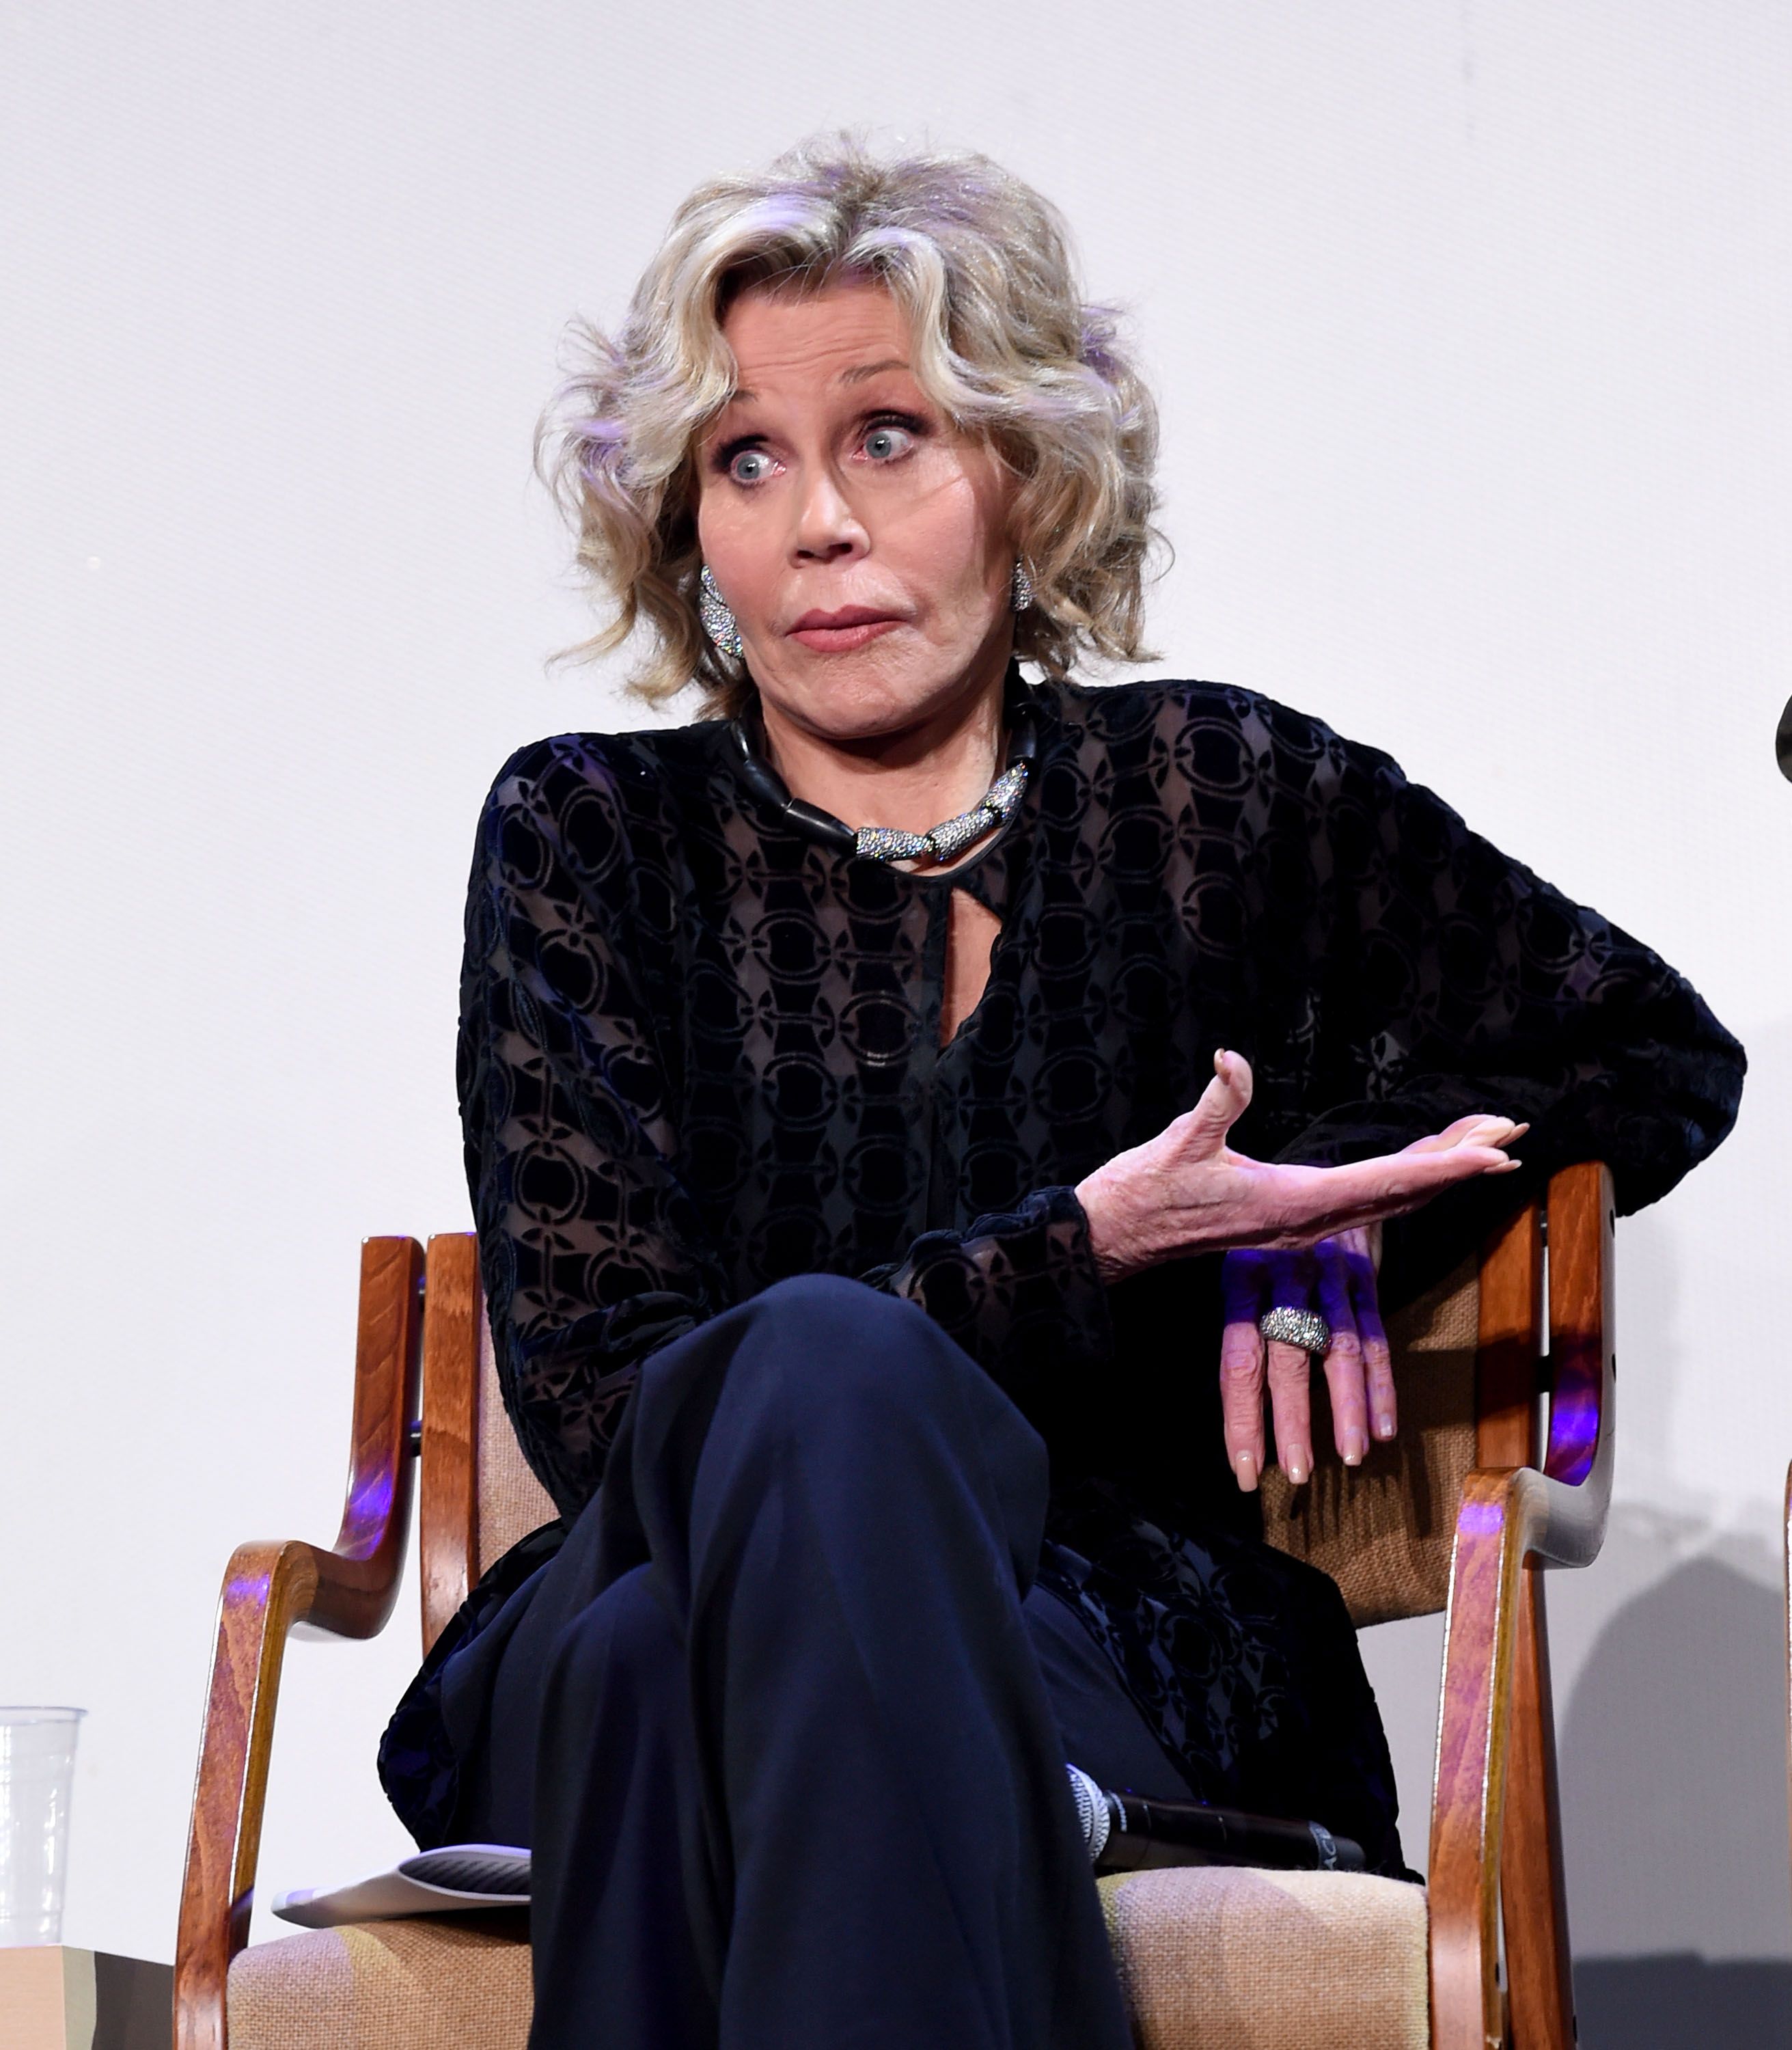 Jane Fonda during the HFPA Film Restortion Summit: The Global Effort to Preserve Our Film Heritage at The Theatre at Ace Hotel on March 09, 2019 in Los Angeles, California. | Source: Getty Images